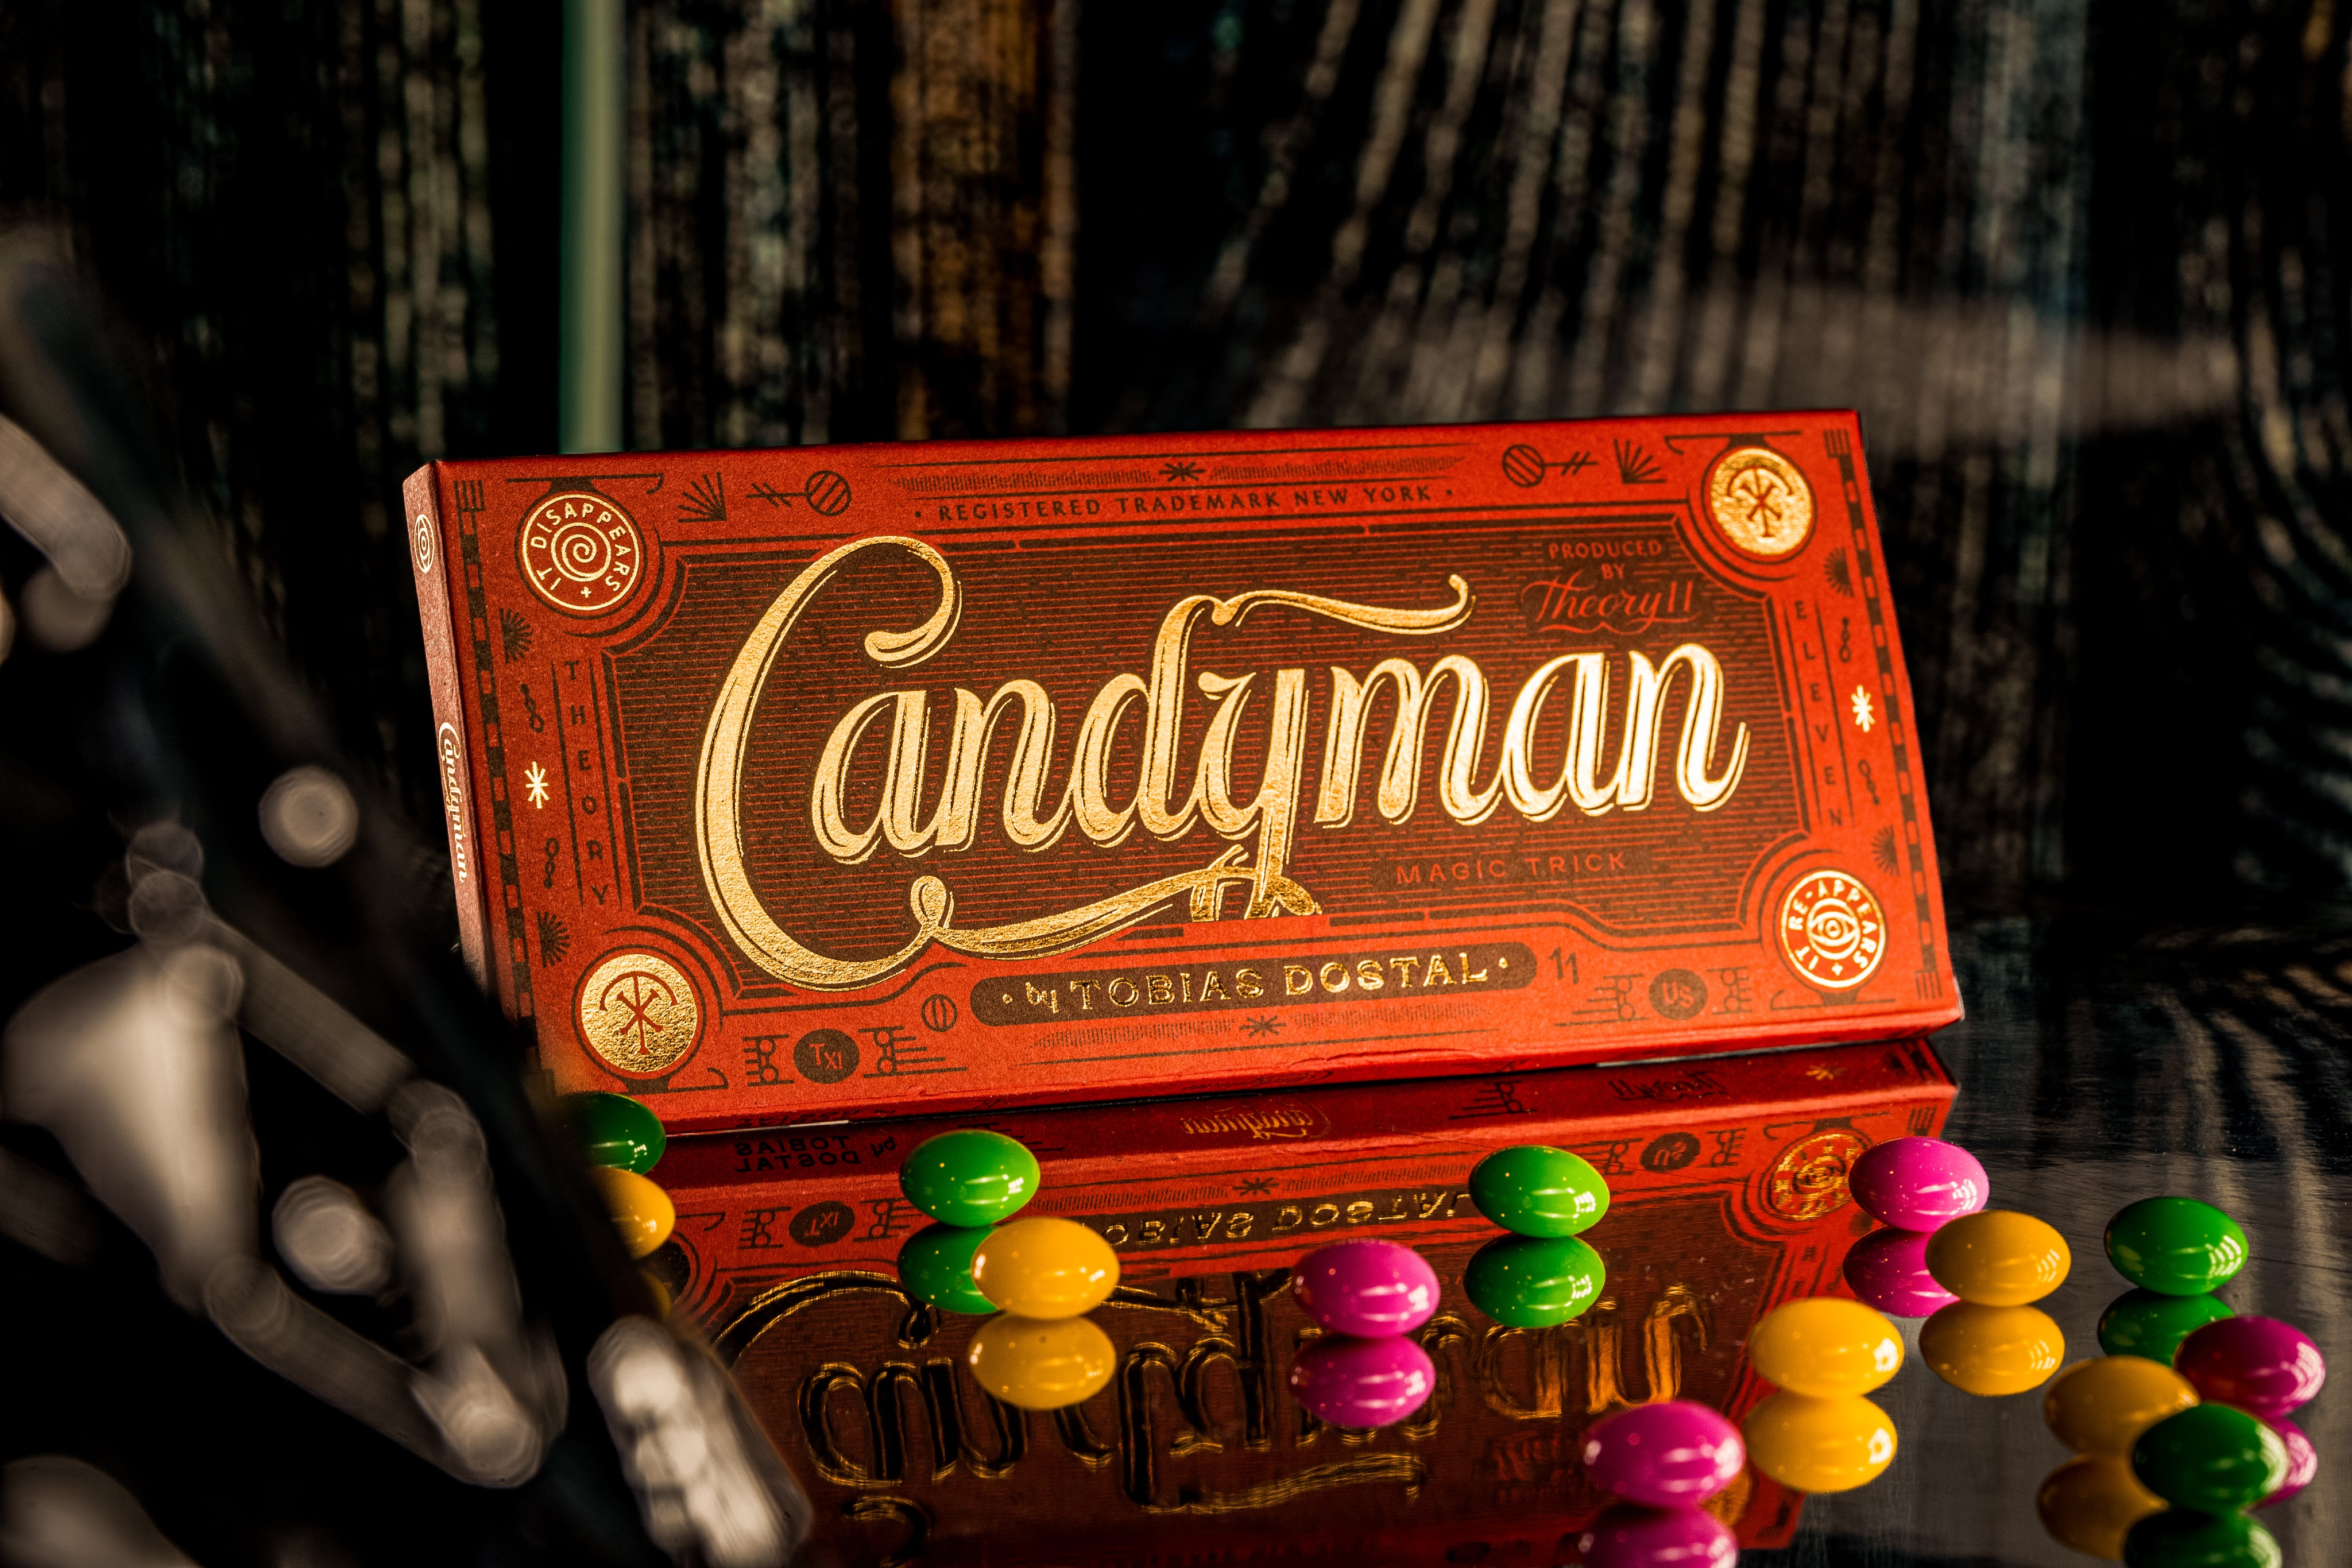 Candyman - We want to encourage you to try making some of